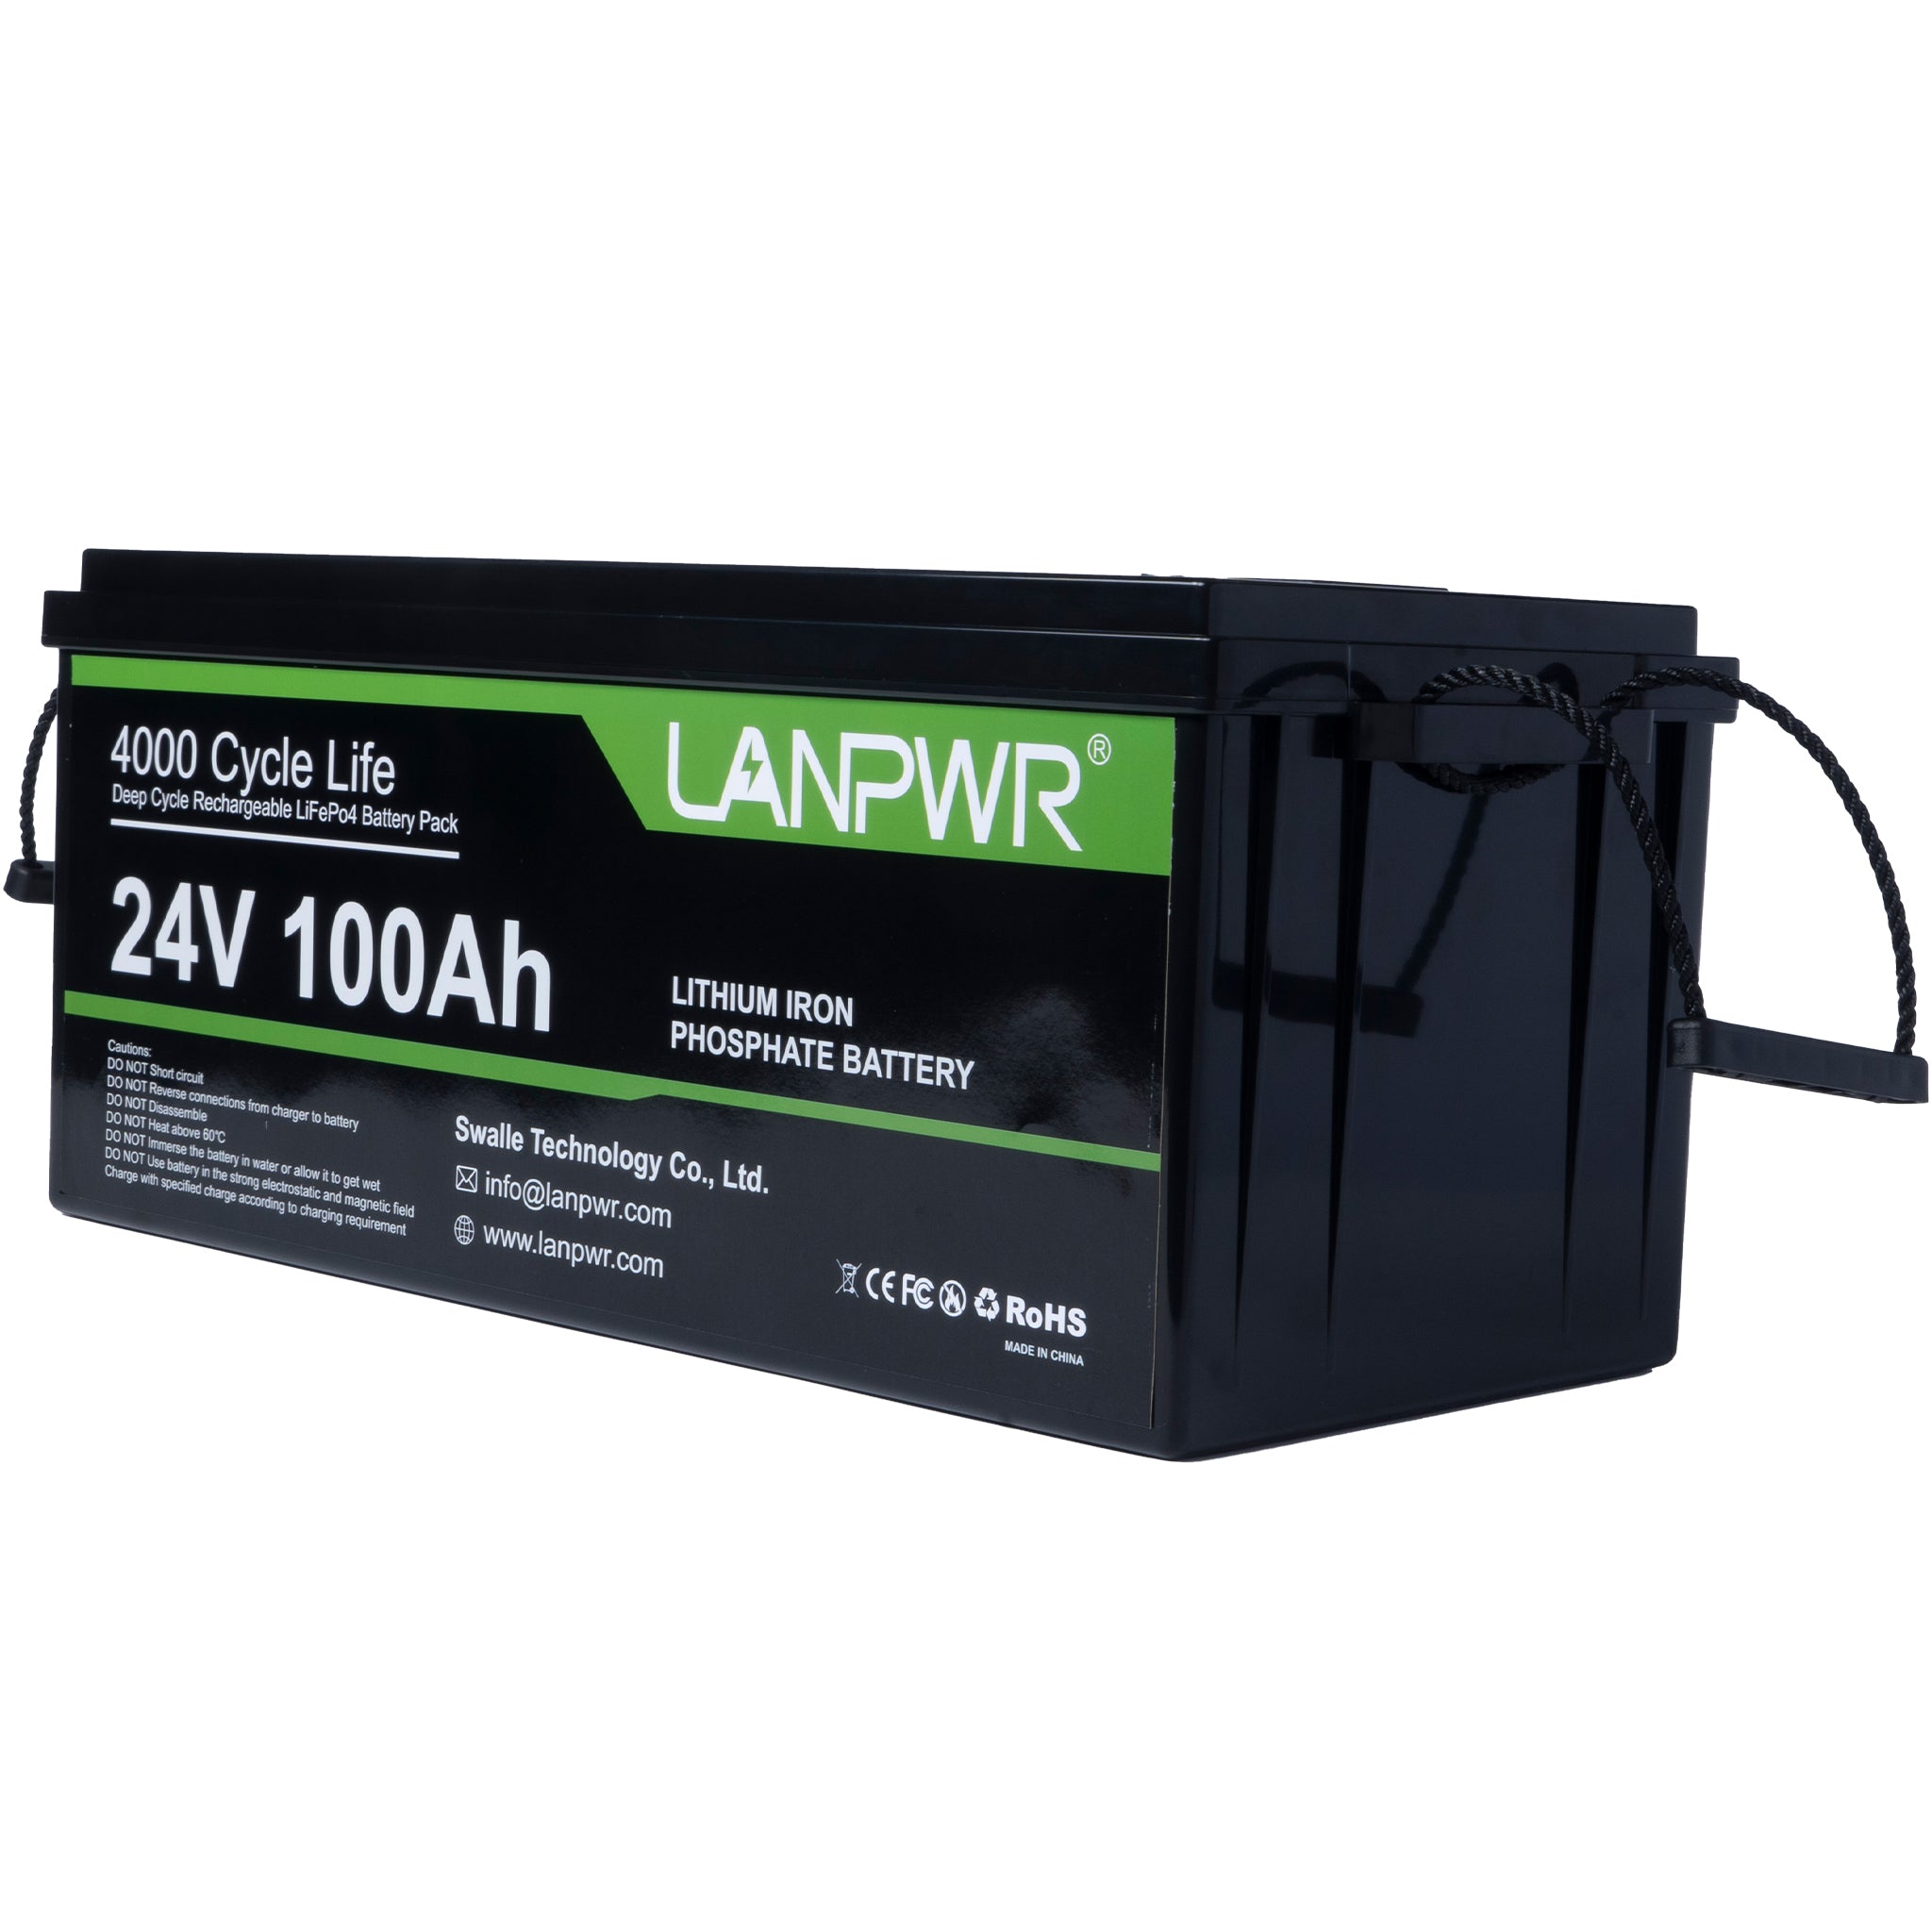 Lanpwr 24V 100Ah LiFePO4 Battery, Build-In 100A BMS, Maximum Continuous Load 2560W, 2560Wh Energy